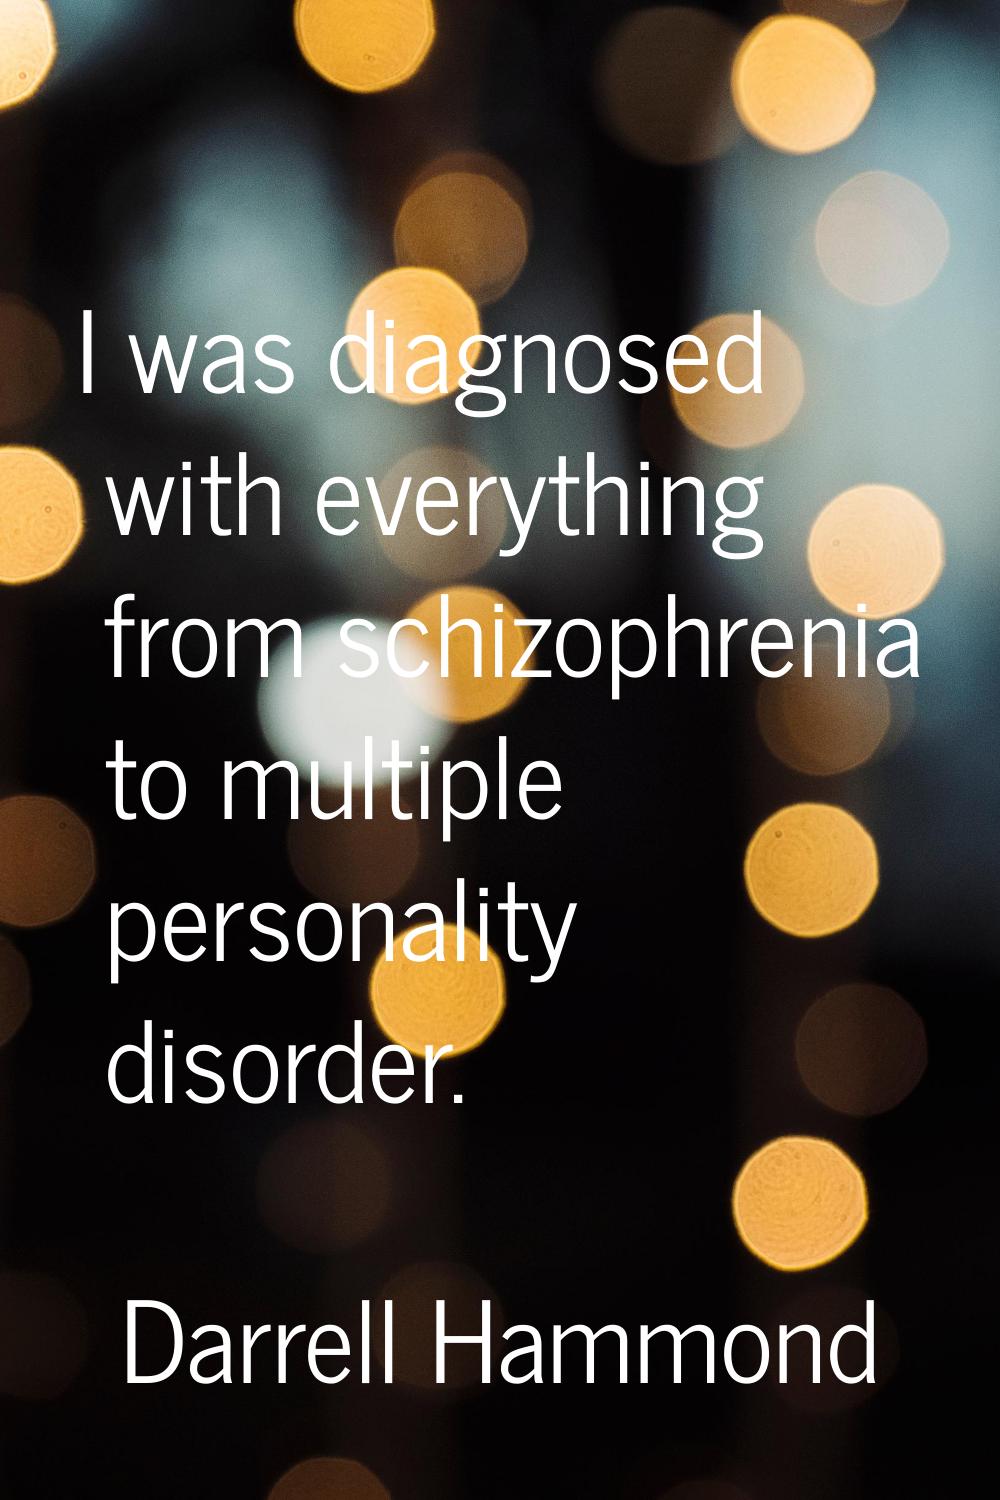 I was diagnosed with everything from schizophrenia to multiple personality disorder.